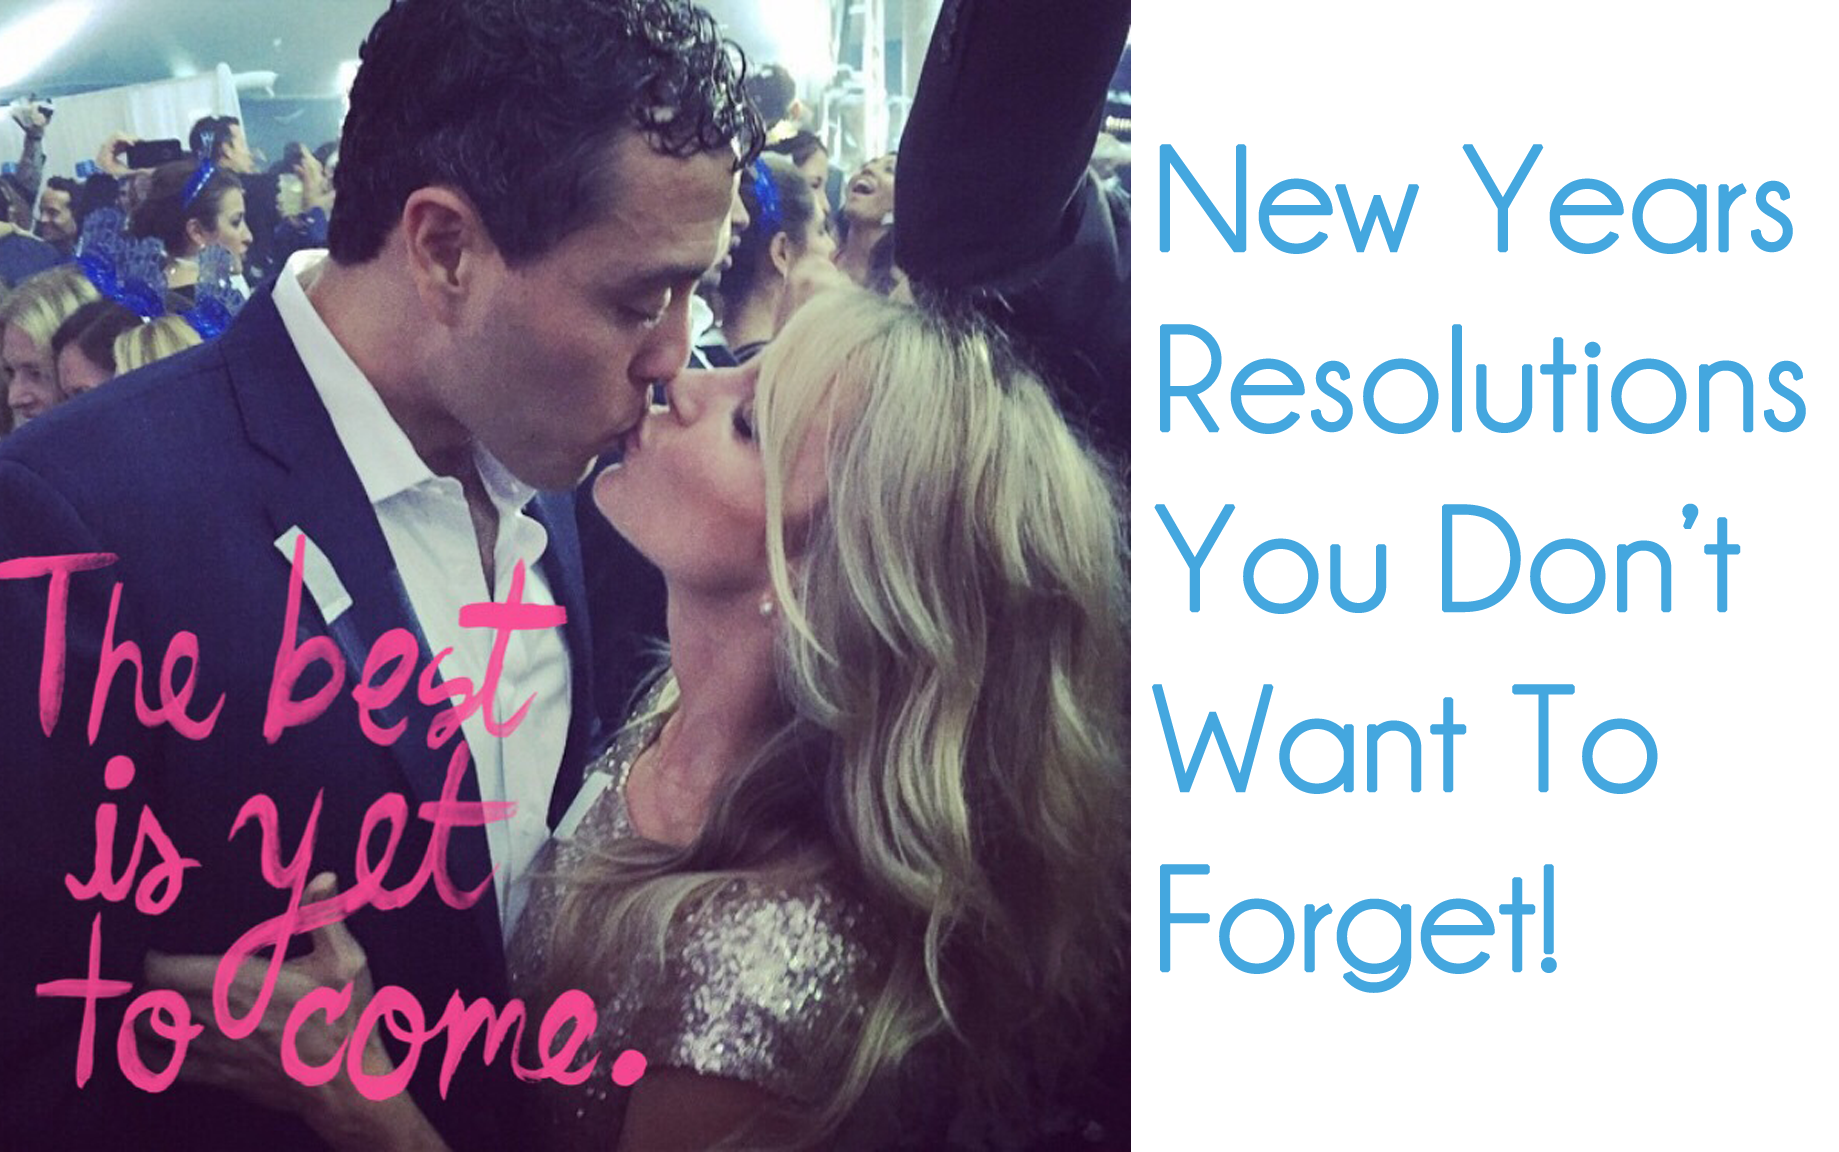 Dating & Relationship Advice: New Years Resolutions You Don’t Want To Forget